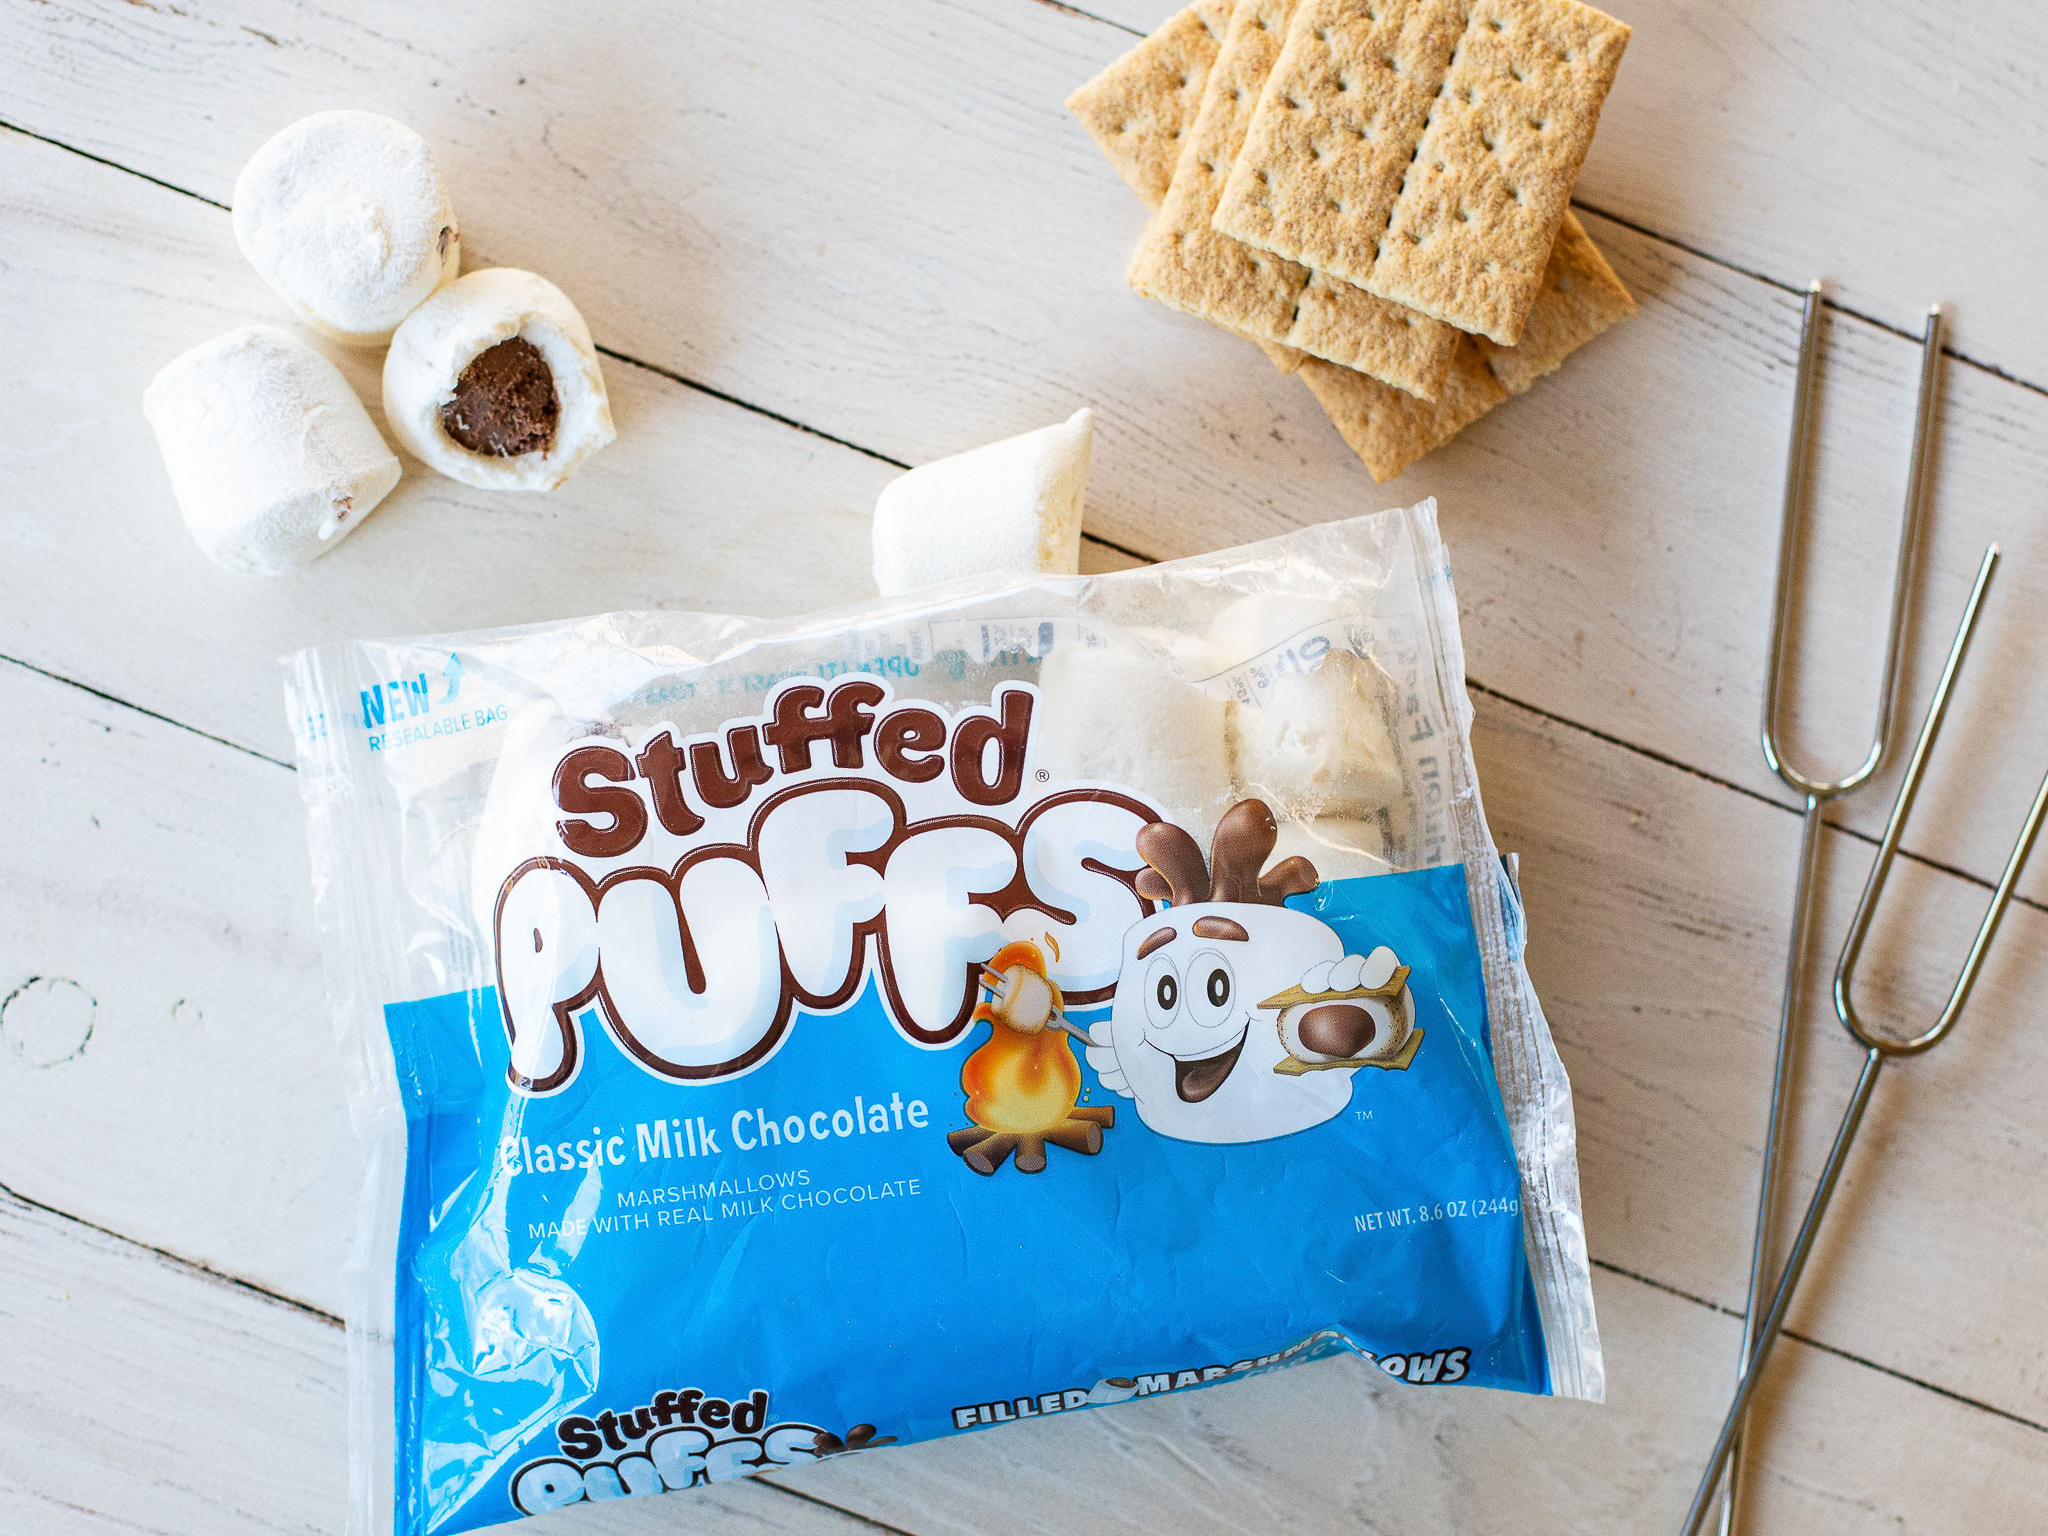 Try Stuffed Puffs Filled Marshmallows For Just $2.44 At Publix – Almost Half Price!